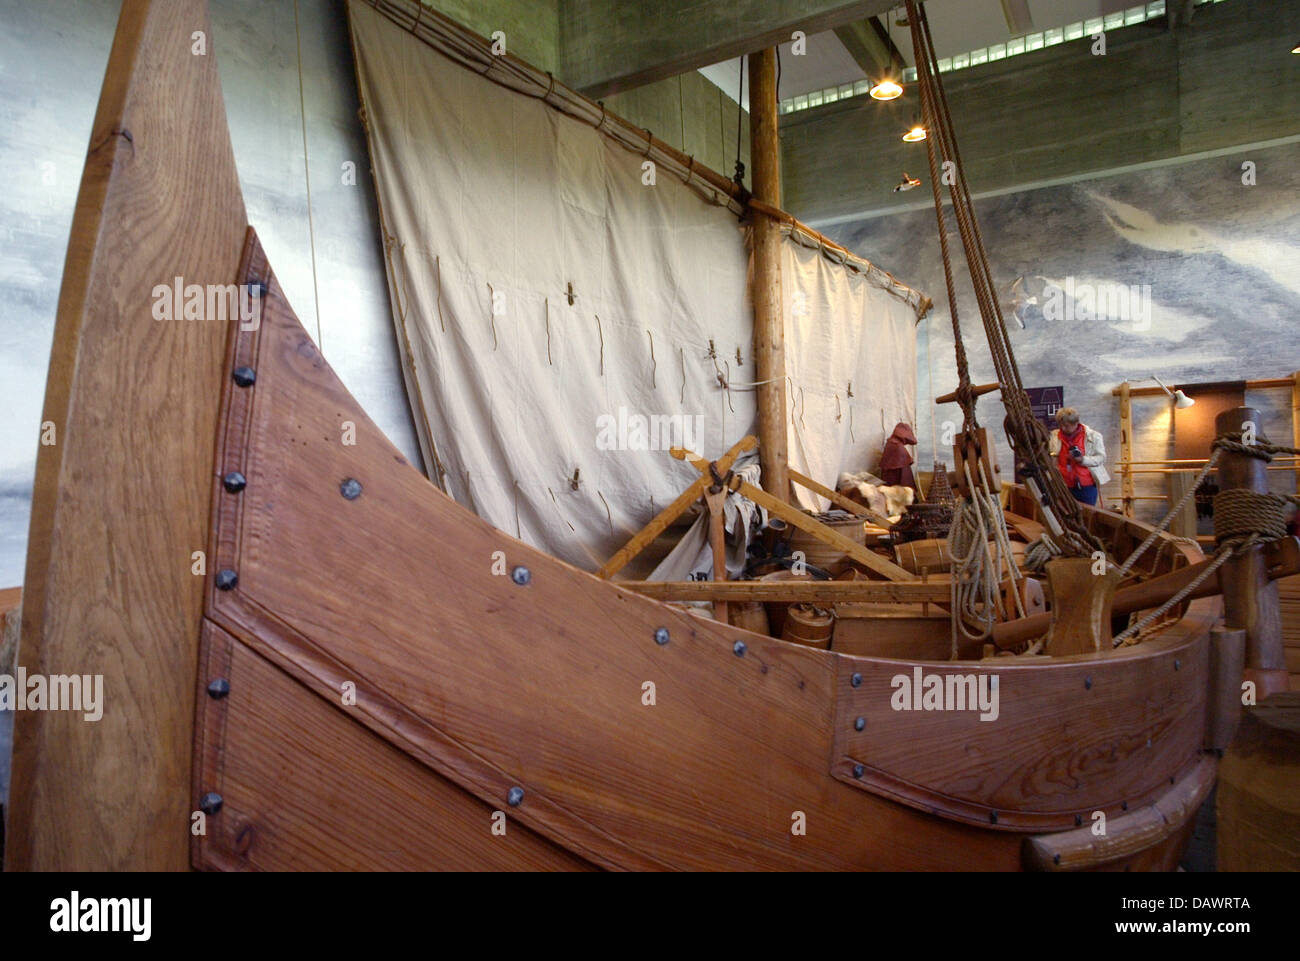 A reconstructed Viking ship of the 11th century, discoverd in the Roskilde fjord in 1962, is presented in the ship hall of the museum for Viking ships in Roskilde, Denmark, 22 May 2007. Shipbuilding and seafaring of the Vikings are presented in the museum that has its own wharf and an archaeological workshop and offers Viking ship boat trips in the summer. Photo: Maurizio Gambarini Stock Photo